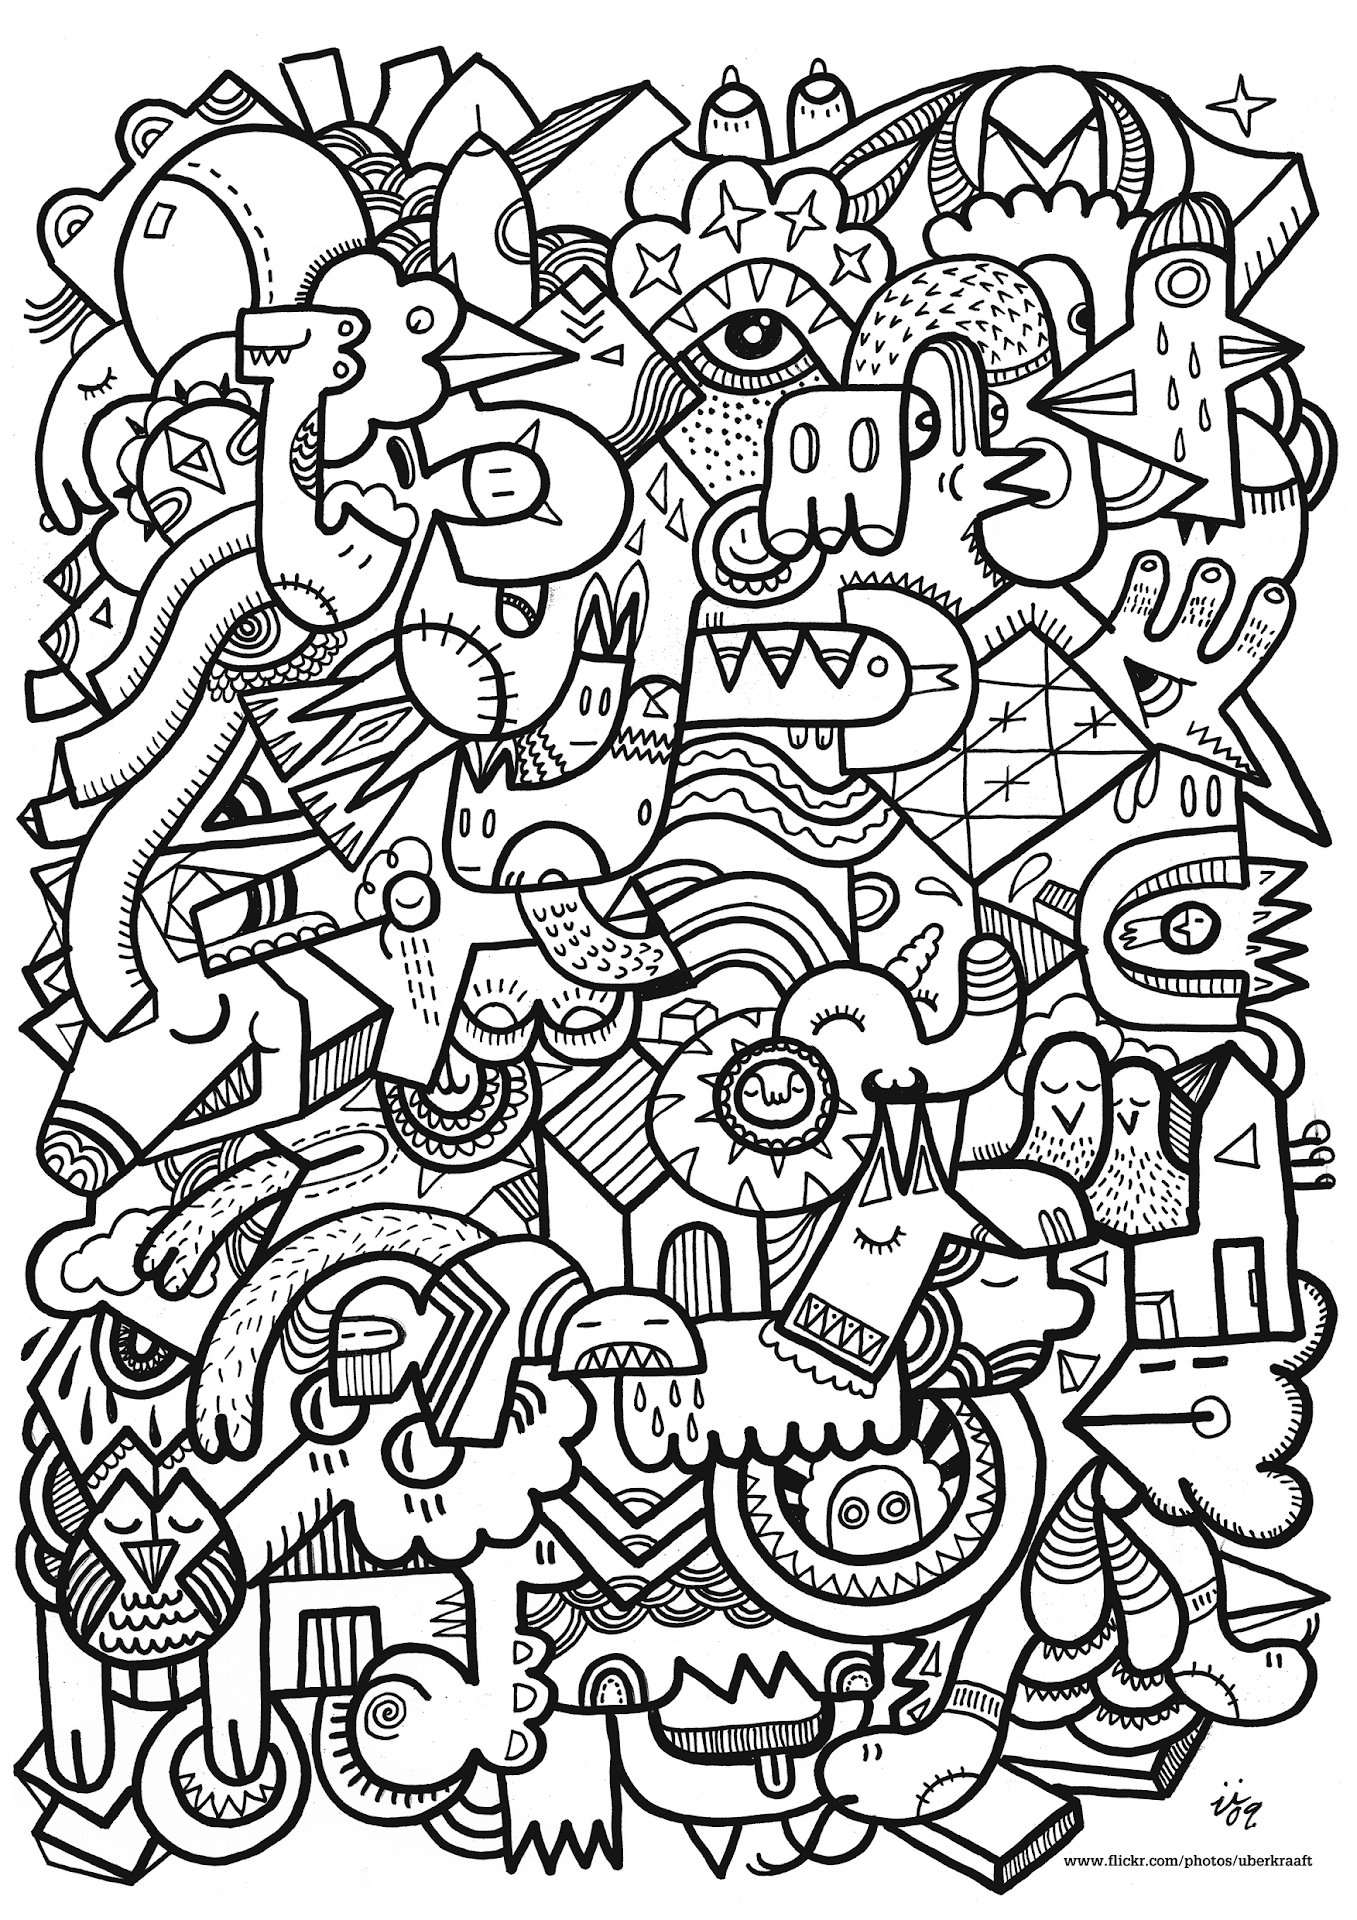 Download 49 EASY COLORING PAGES FOR ADULTS HD PRINTABLE PDF - * Coloring